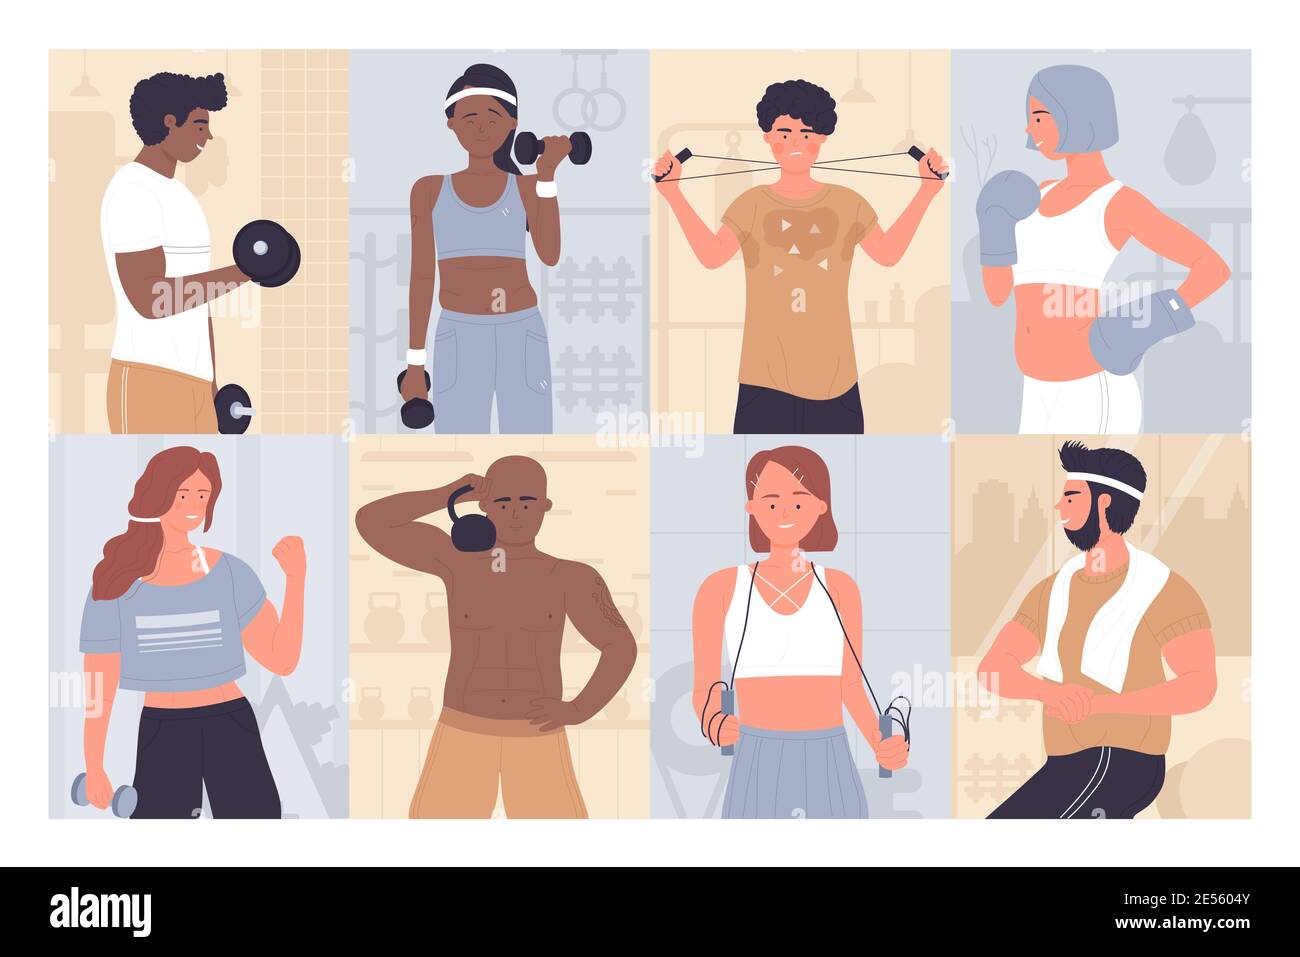 People at sports training workout vector illustration set. Cartoon active young and old man woman sportsman character doing exercises, athlete holding dumbbells or barbell background collection Stock Vector